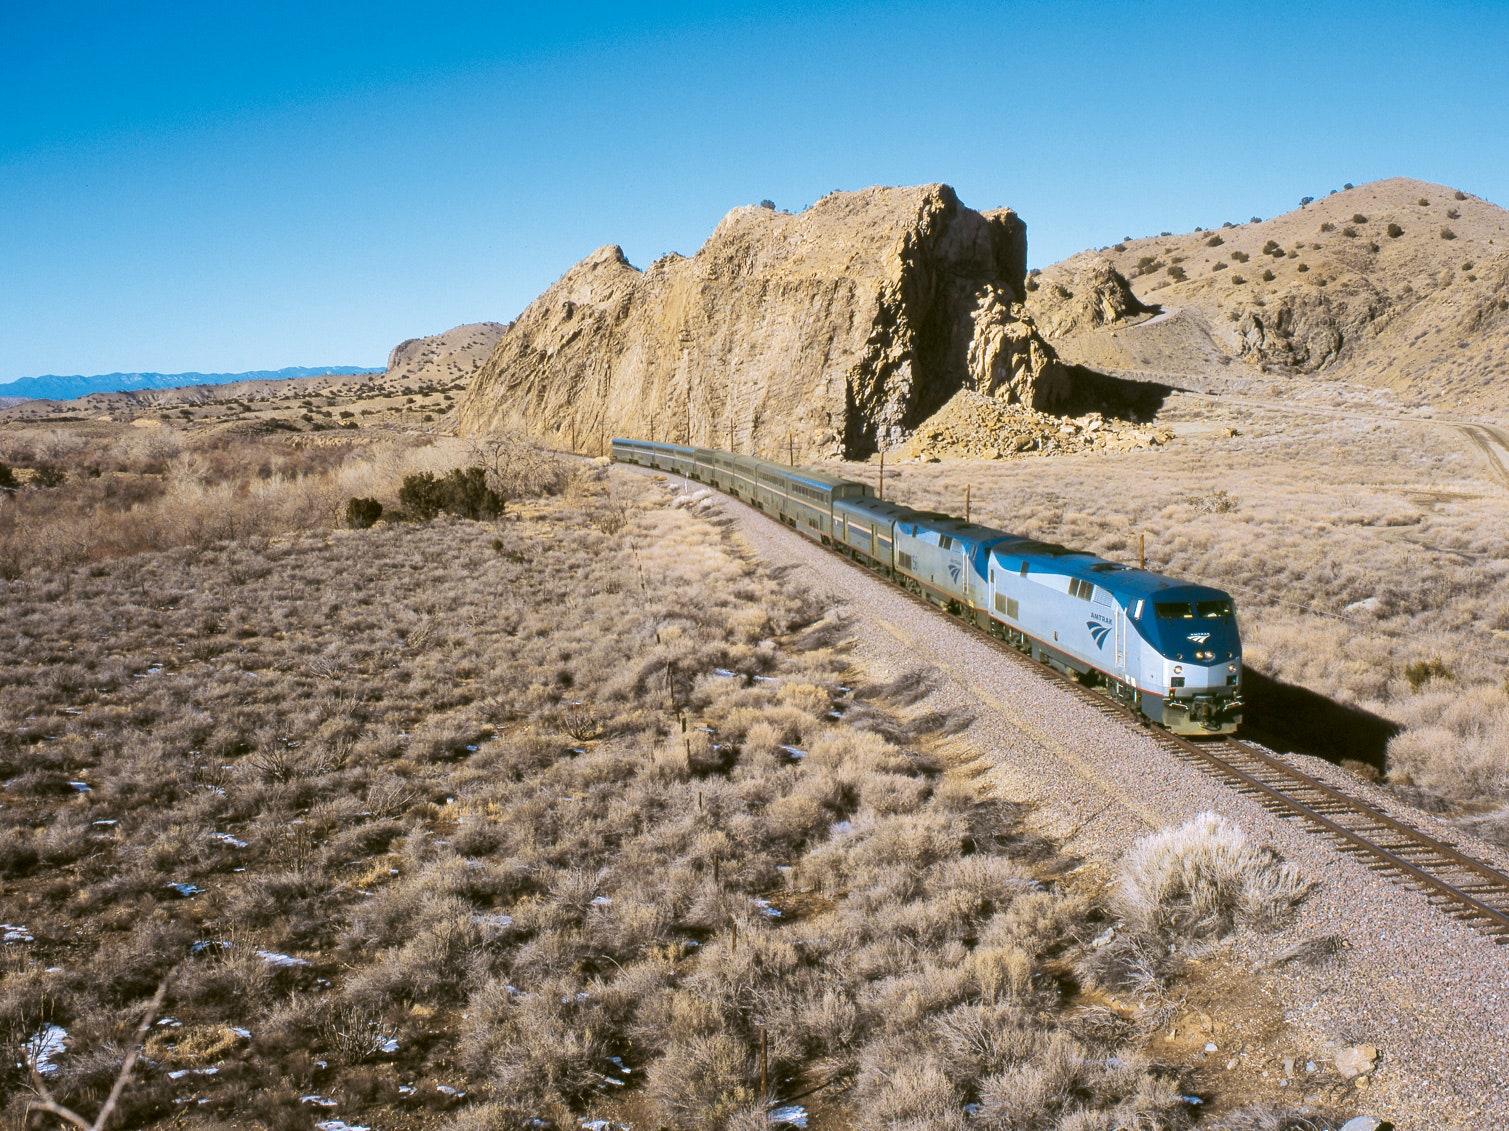 <p>From the rolling farmlands of Illinois, across the Mississippi River, to the red mesas of New Mexico, and into the Mojave Desert, the <a href="https://www.amtrak.com/southwest-chief-train">Southwest Chief</a> traverses more than 2,000 miles from <a href="http://www.cntraveler.com/destinations/chicago?mbid=synd_msn_rss&utm_source=msn&utm_medium=syndication">Chicago</a> to <a href="http://www.cntraveler.com/destinations/los-angeles?mbid=synd_msn_rss&utm_source=msn&utm_medium=syndication">Los Angeles</a>. Travelers wary of a full 40-hour venture can take just a partial piece of the route, but don’t miss the most scenic stretch, which spans Colorado, New Mexico, Arizona, and southern California, including the Ratón Pass—a National Historic Landmark along the Santa Fe Trail.</p> <p><a href="https://www.amtrak.com/southwest-chief-train">Tickets from $146</a></p><p>Sign up to receive the latest news, expert tips, and inspiration on all things travel</p><a href="https://www.cntraveler.com/newsletter/the-daily?sourceCode=msnsend">Inspire Me</a>